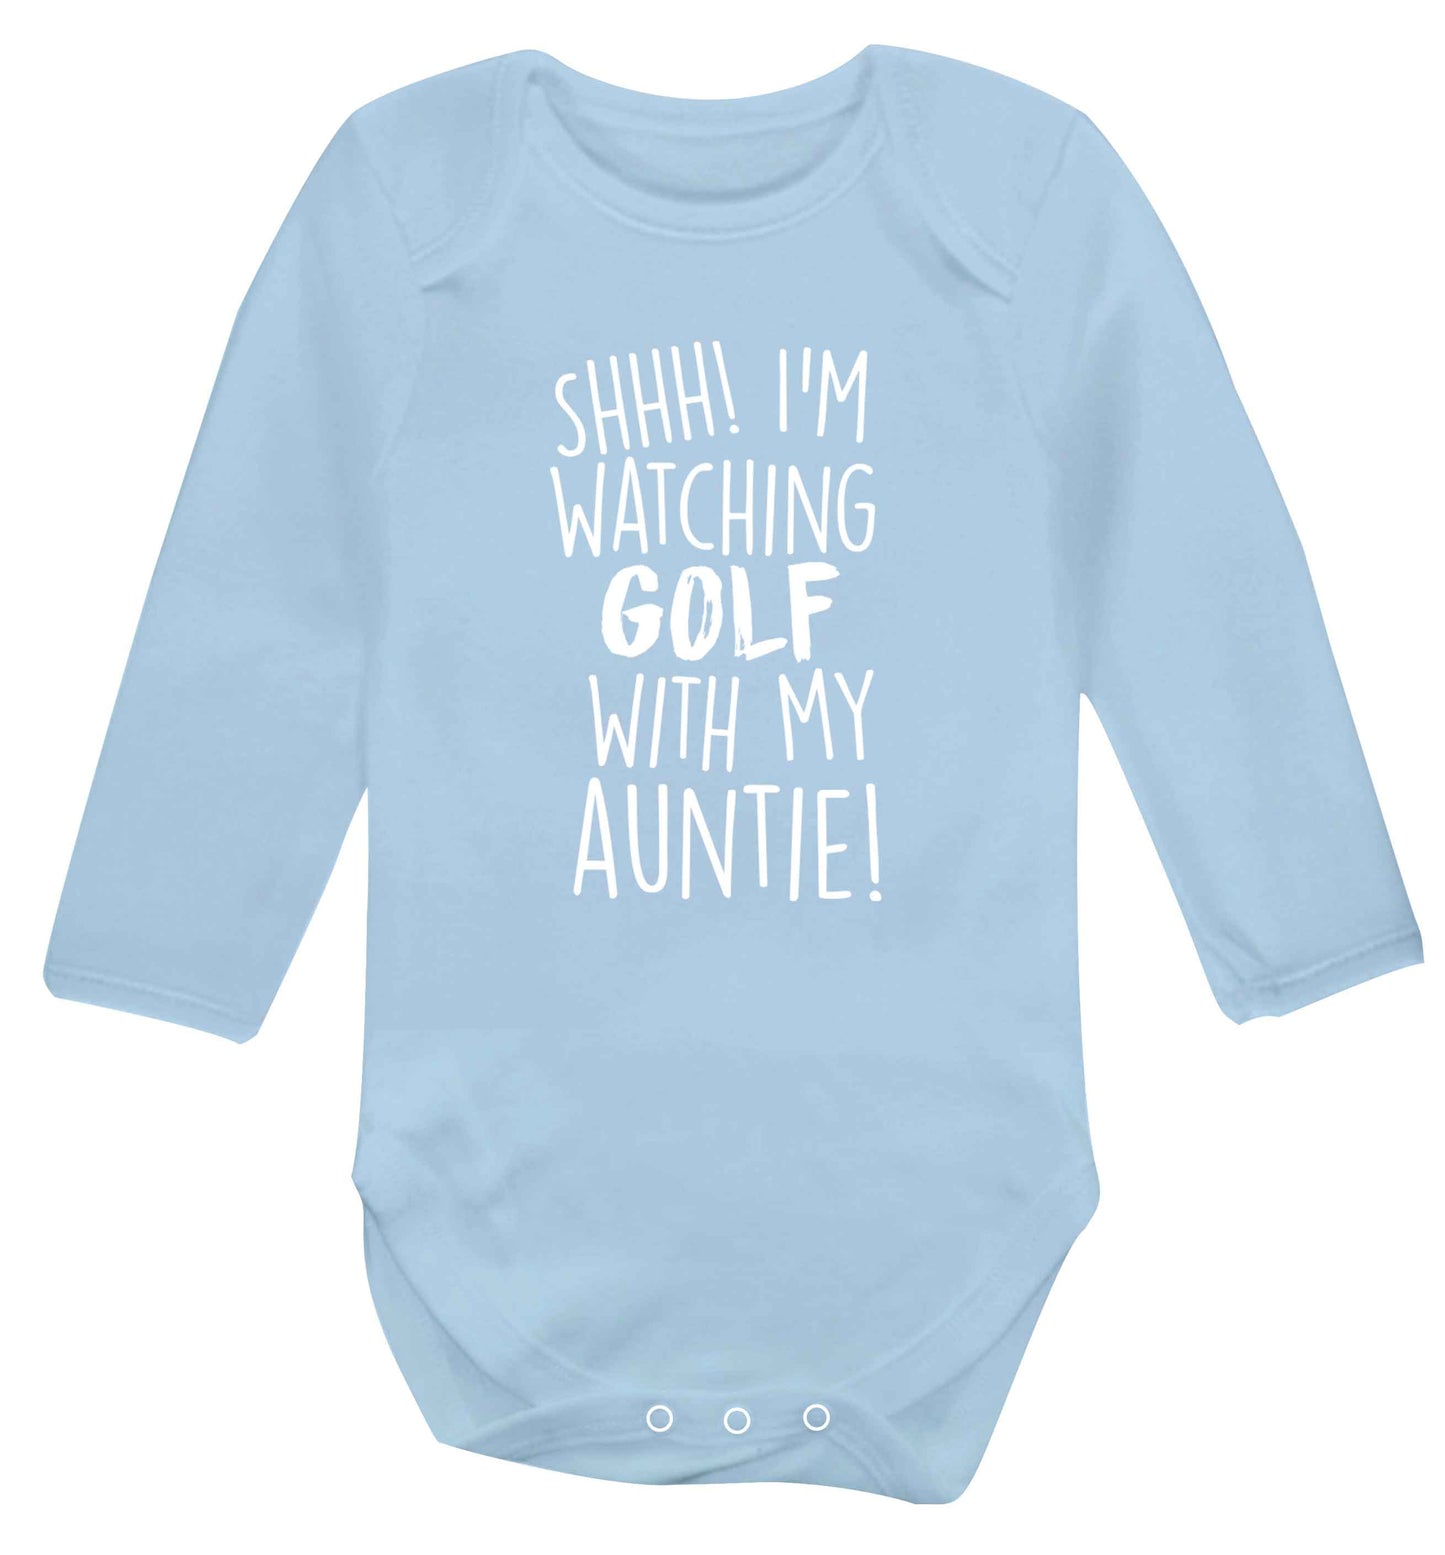 Shh I'm watching golf with my auntie Baby Vest long sleeved pale blue 6-12 months